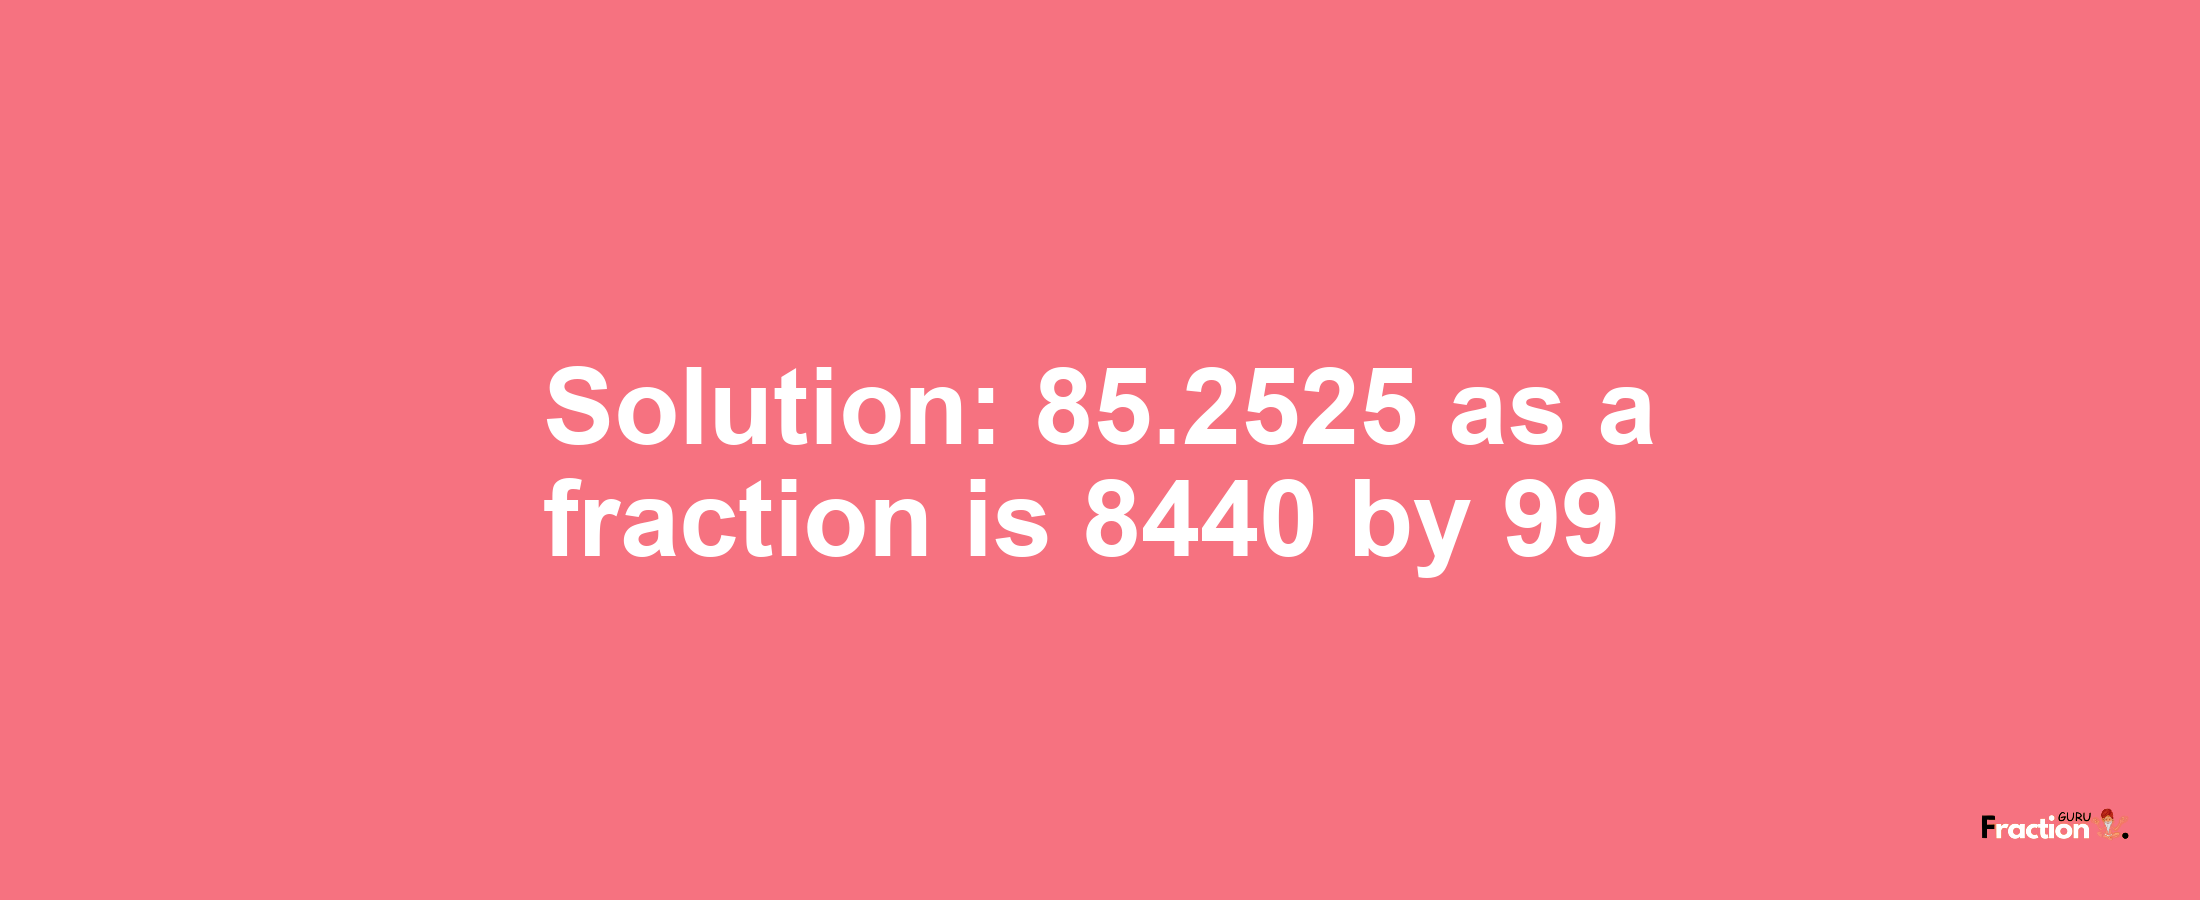 Solution:85.2525 as a fraction is 8440/99